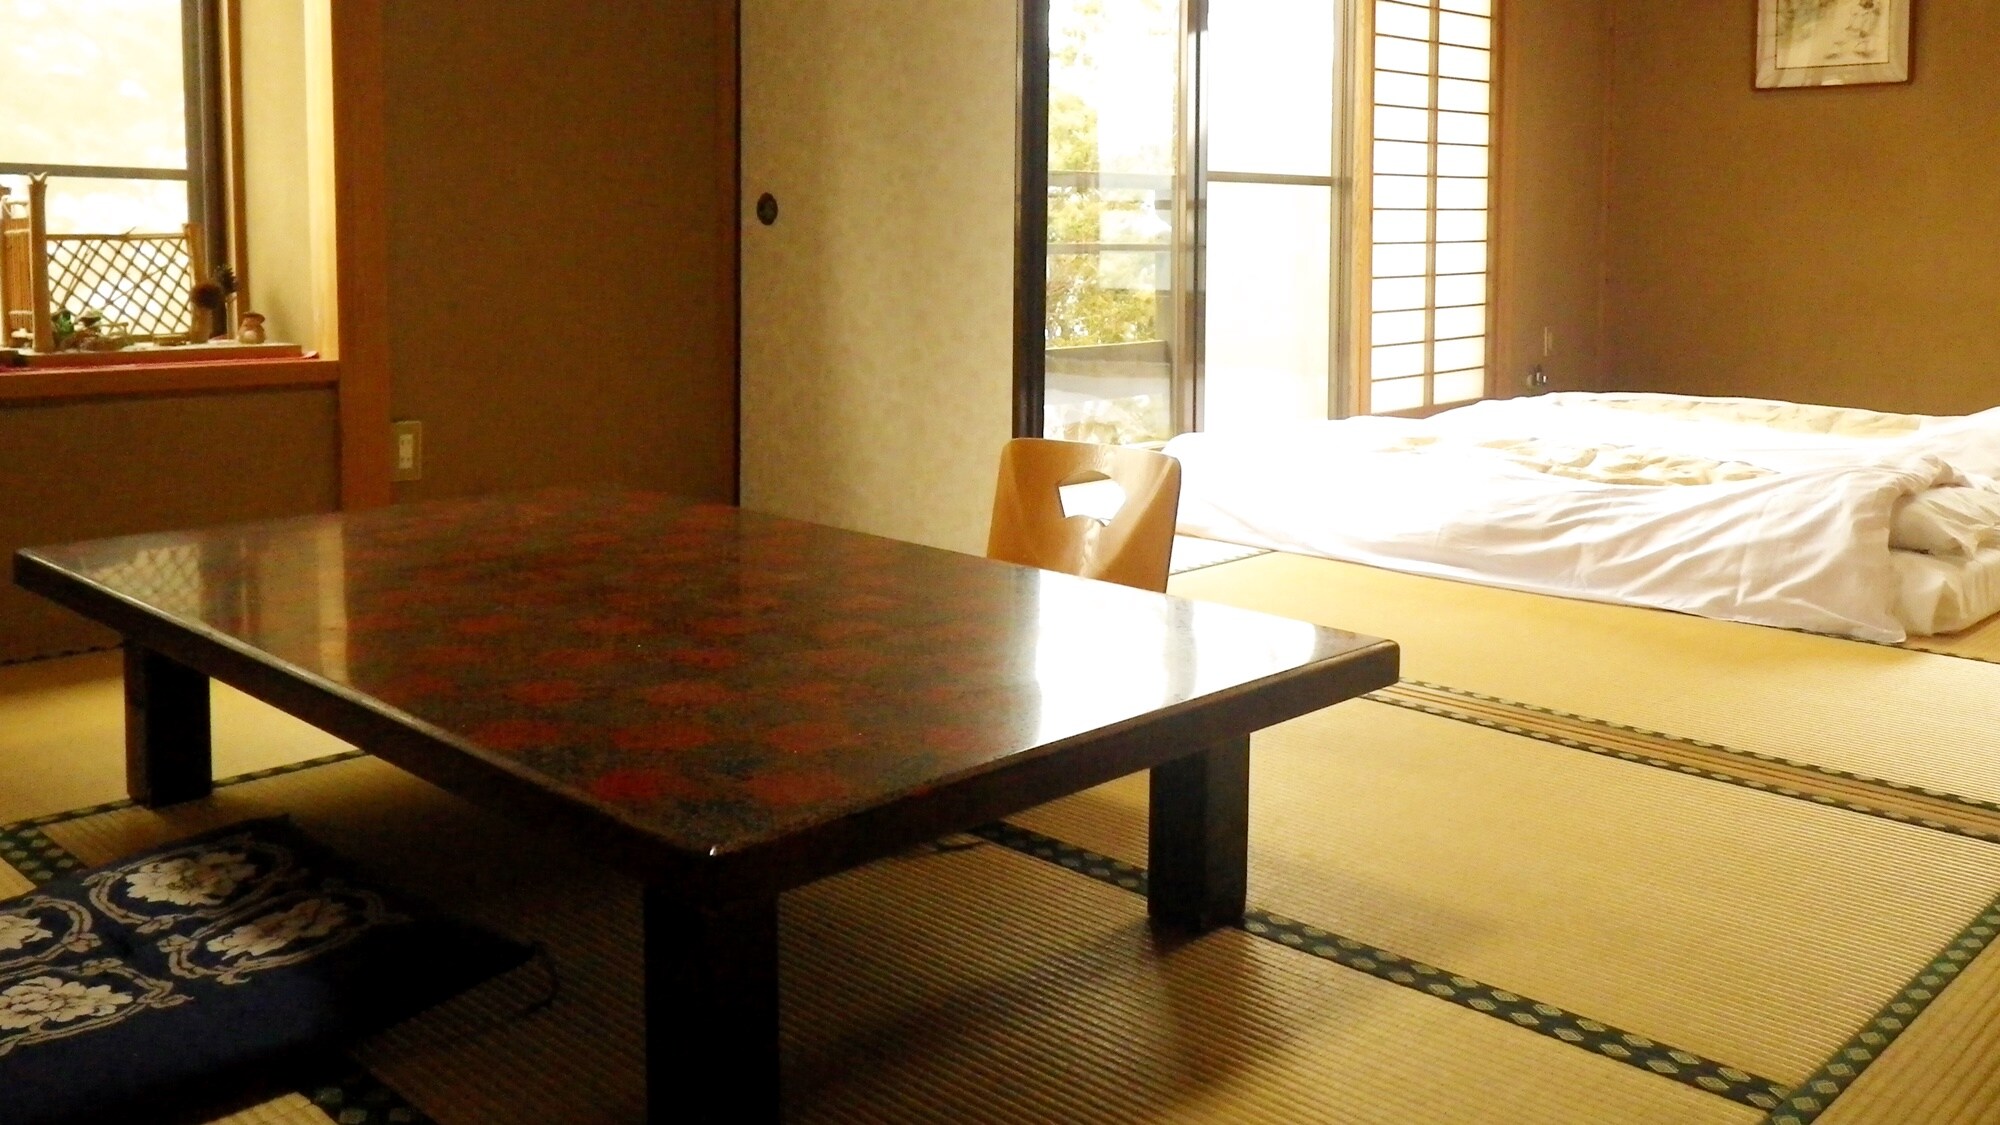 * An example of a Japanese-style room / Please stretch your legs and relax.